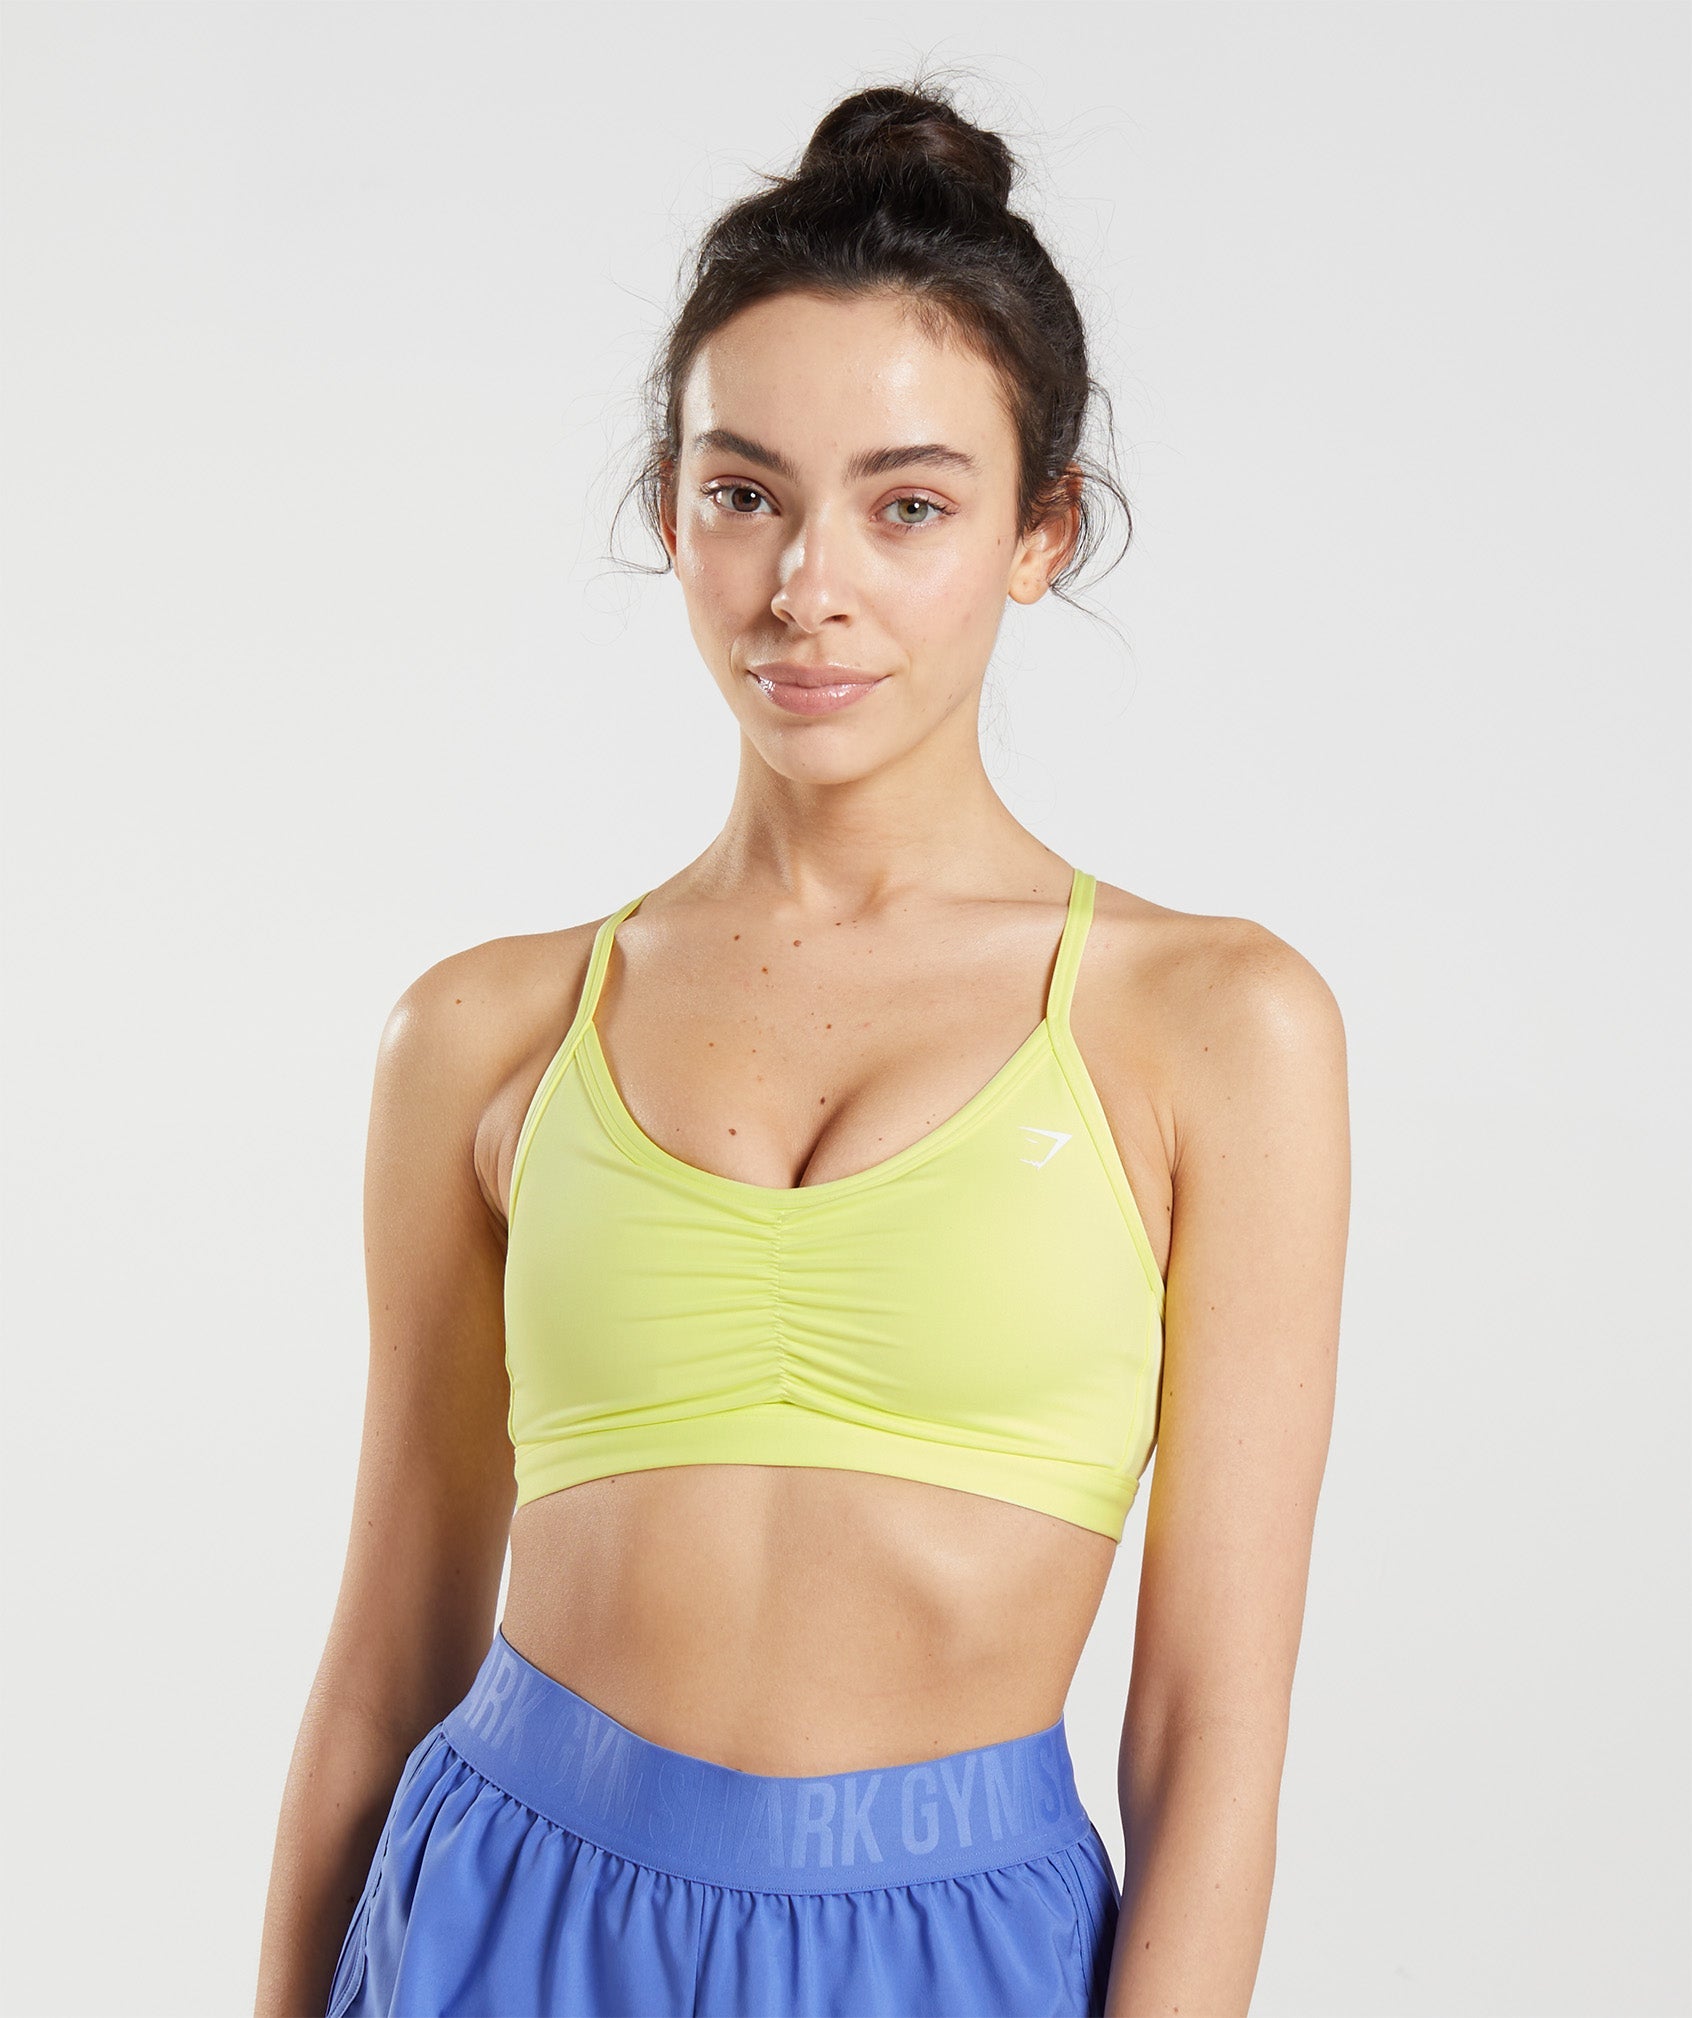 Gymshark Ruched Training Sports Bra White Size XS - $18 (28% Off Retail) -  From Jamie